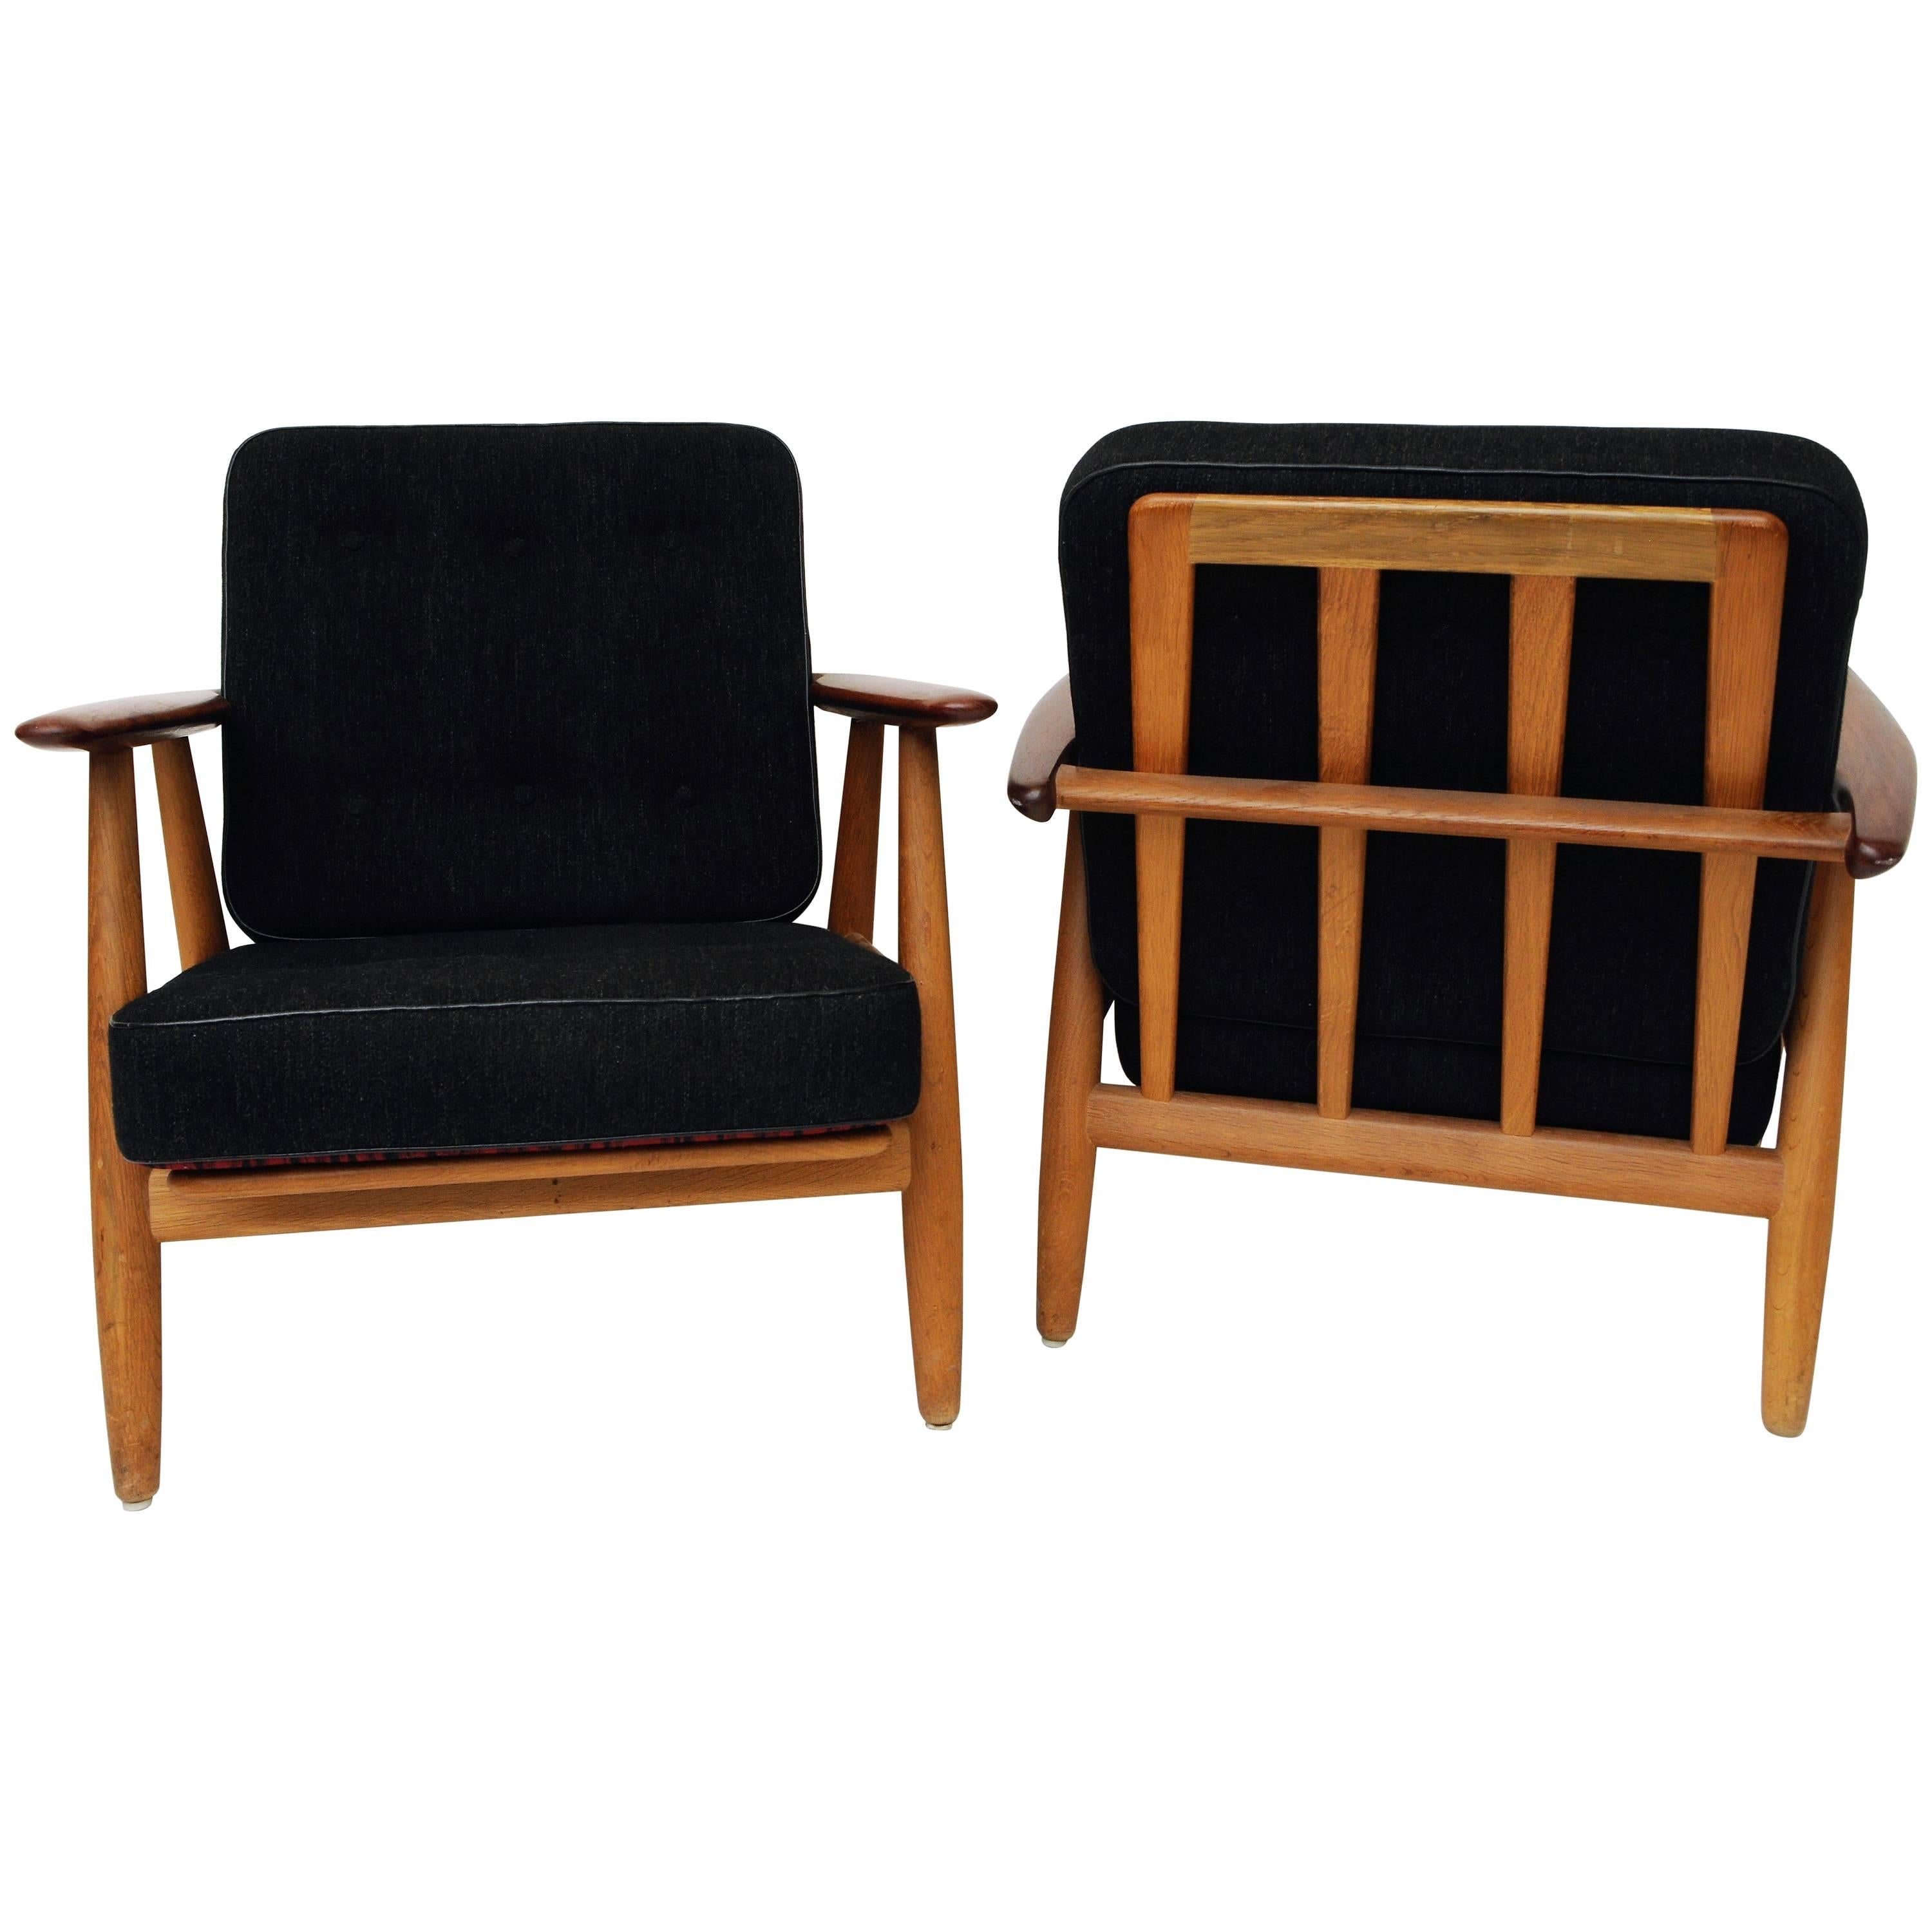 Beautiful pair of the cigar chair model GE240 by Hans J. Wegner for GETAMA Denmark. Produced 1955.  teak and oak arms and leg. The set has reversible patterned black and a red back -and seat cushions so you are able to switch the colors of the seats